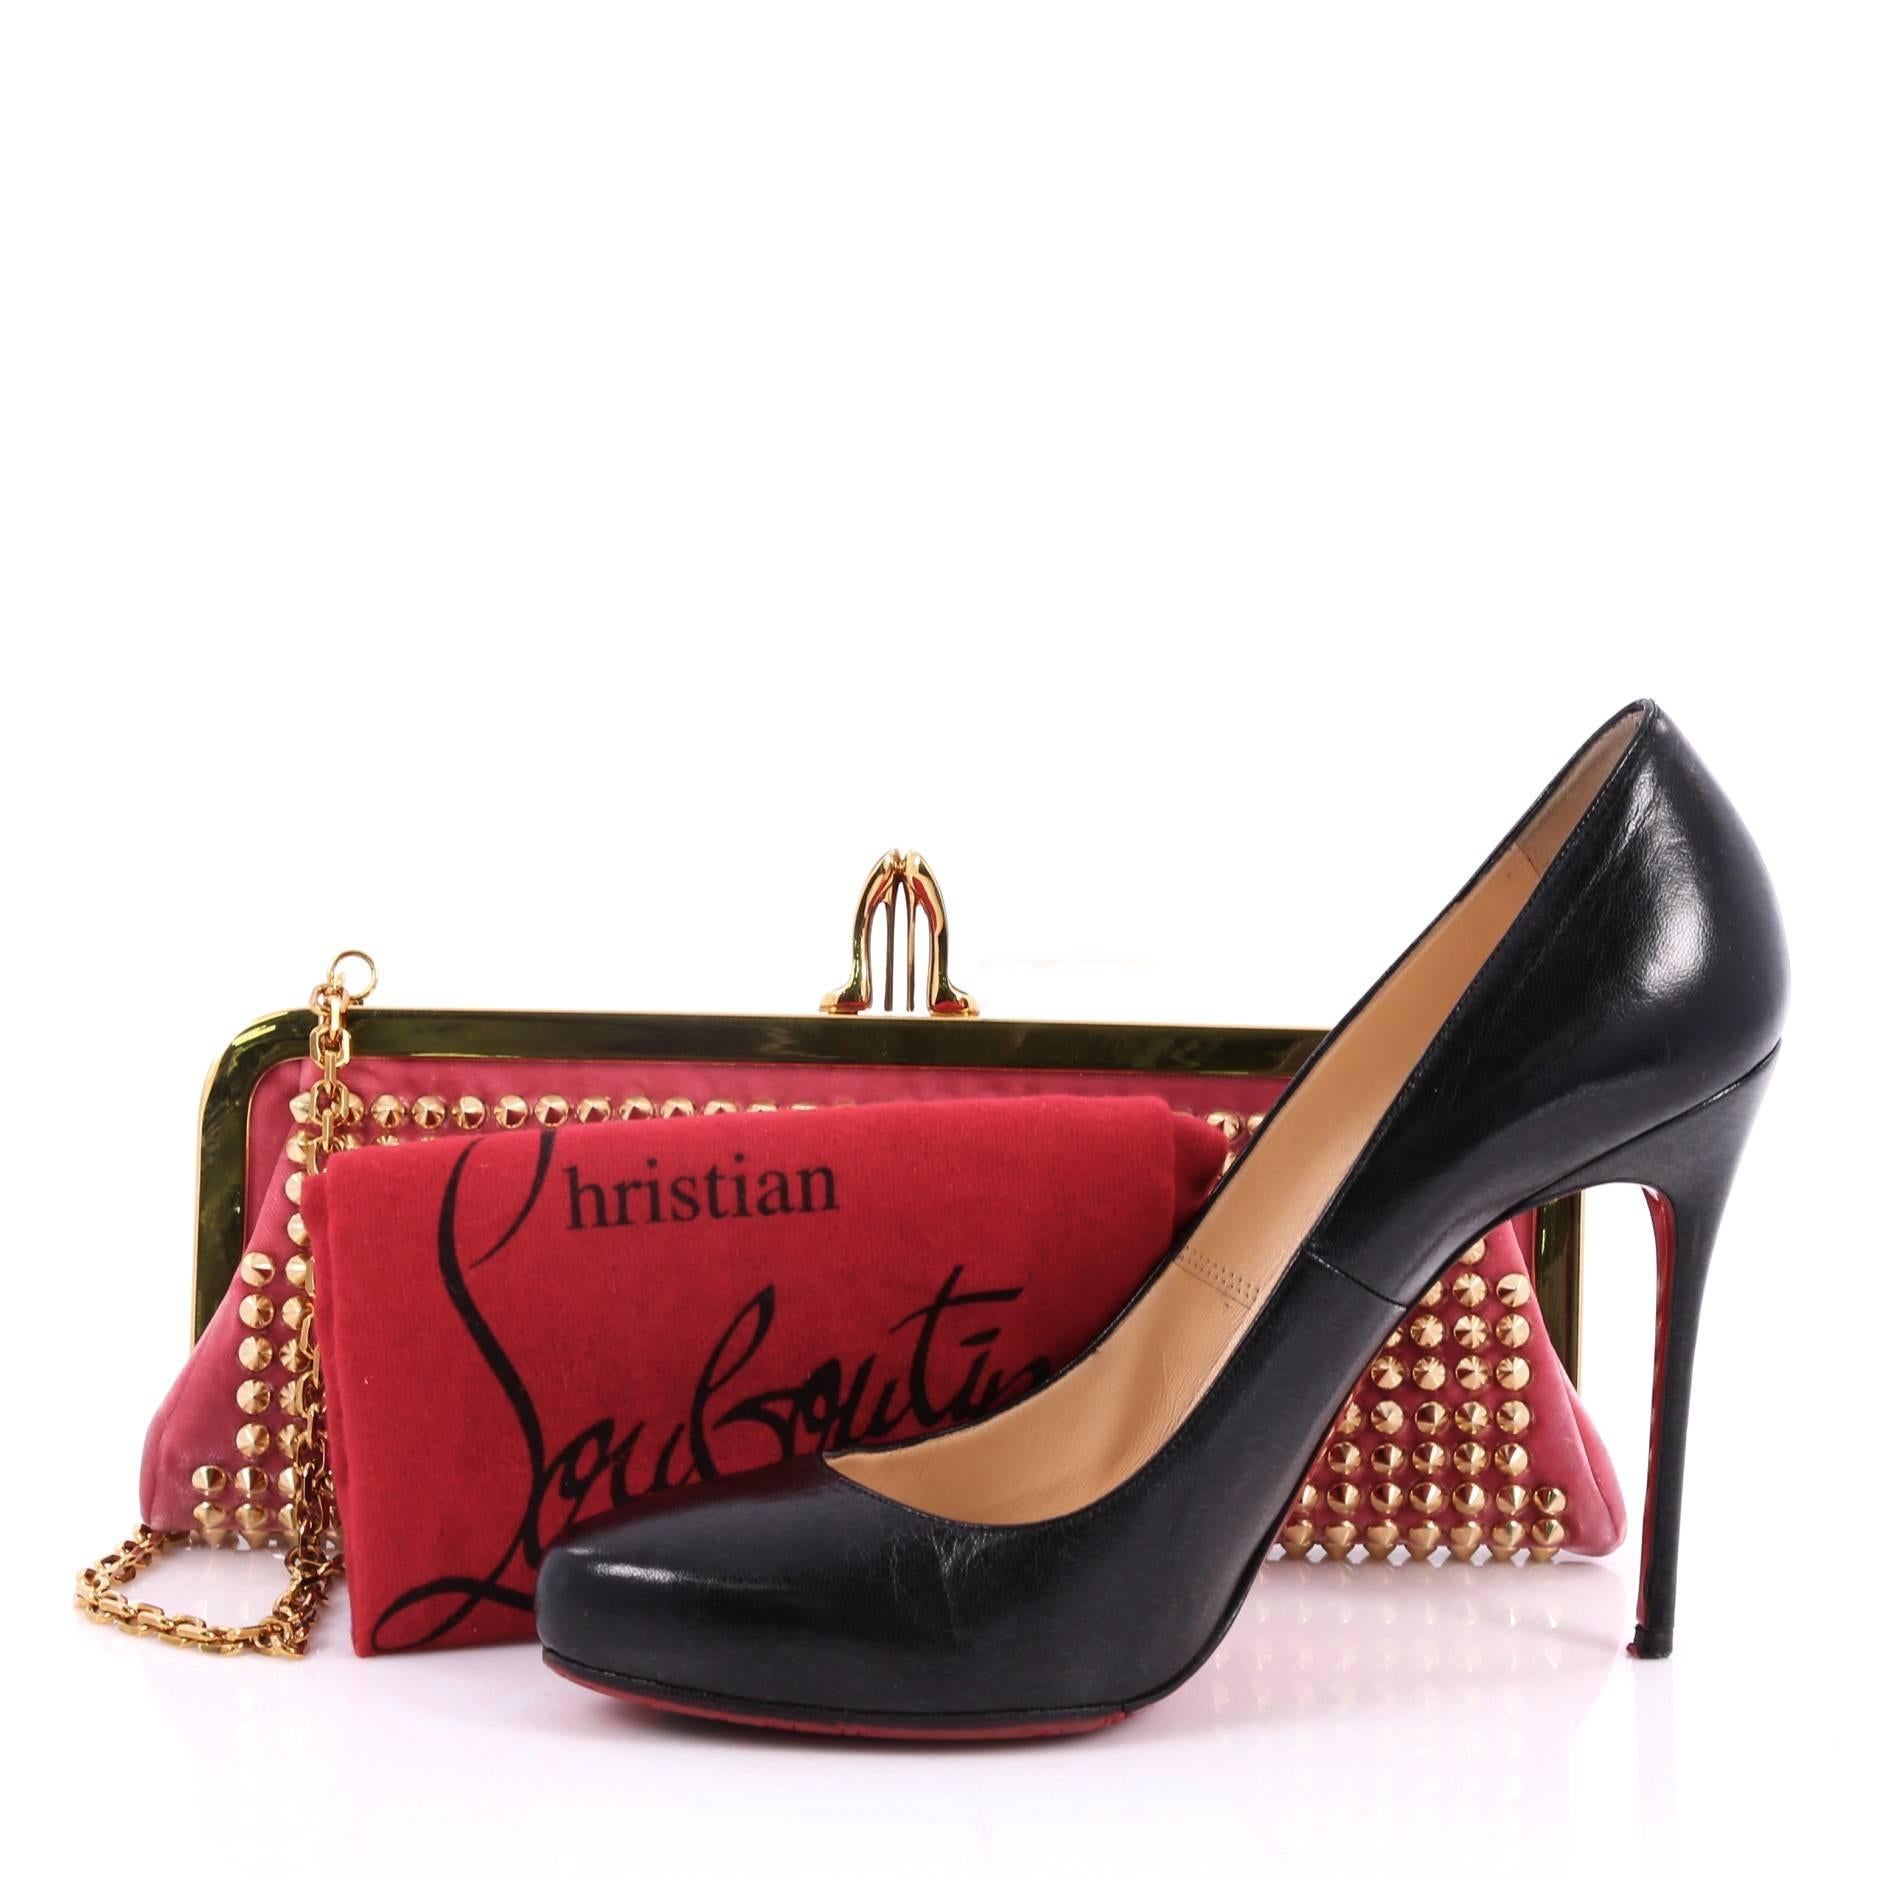 This authentic Christian Louboutin Miss Loubi Chain Clutch Spiked Velvet is an elegant and gorgeous bag perfect for your nights out. Crafted in pink spiked velvet, this clutch features, gold-tone frame, chain link shoulder strap, signature Louboutin